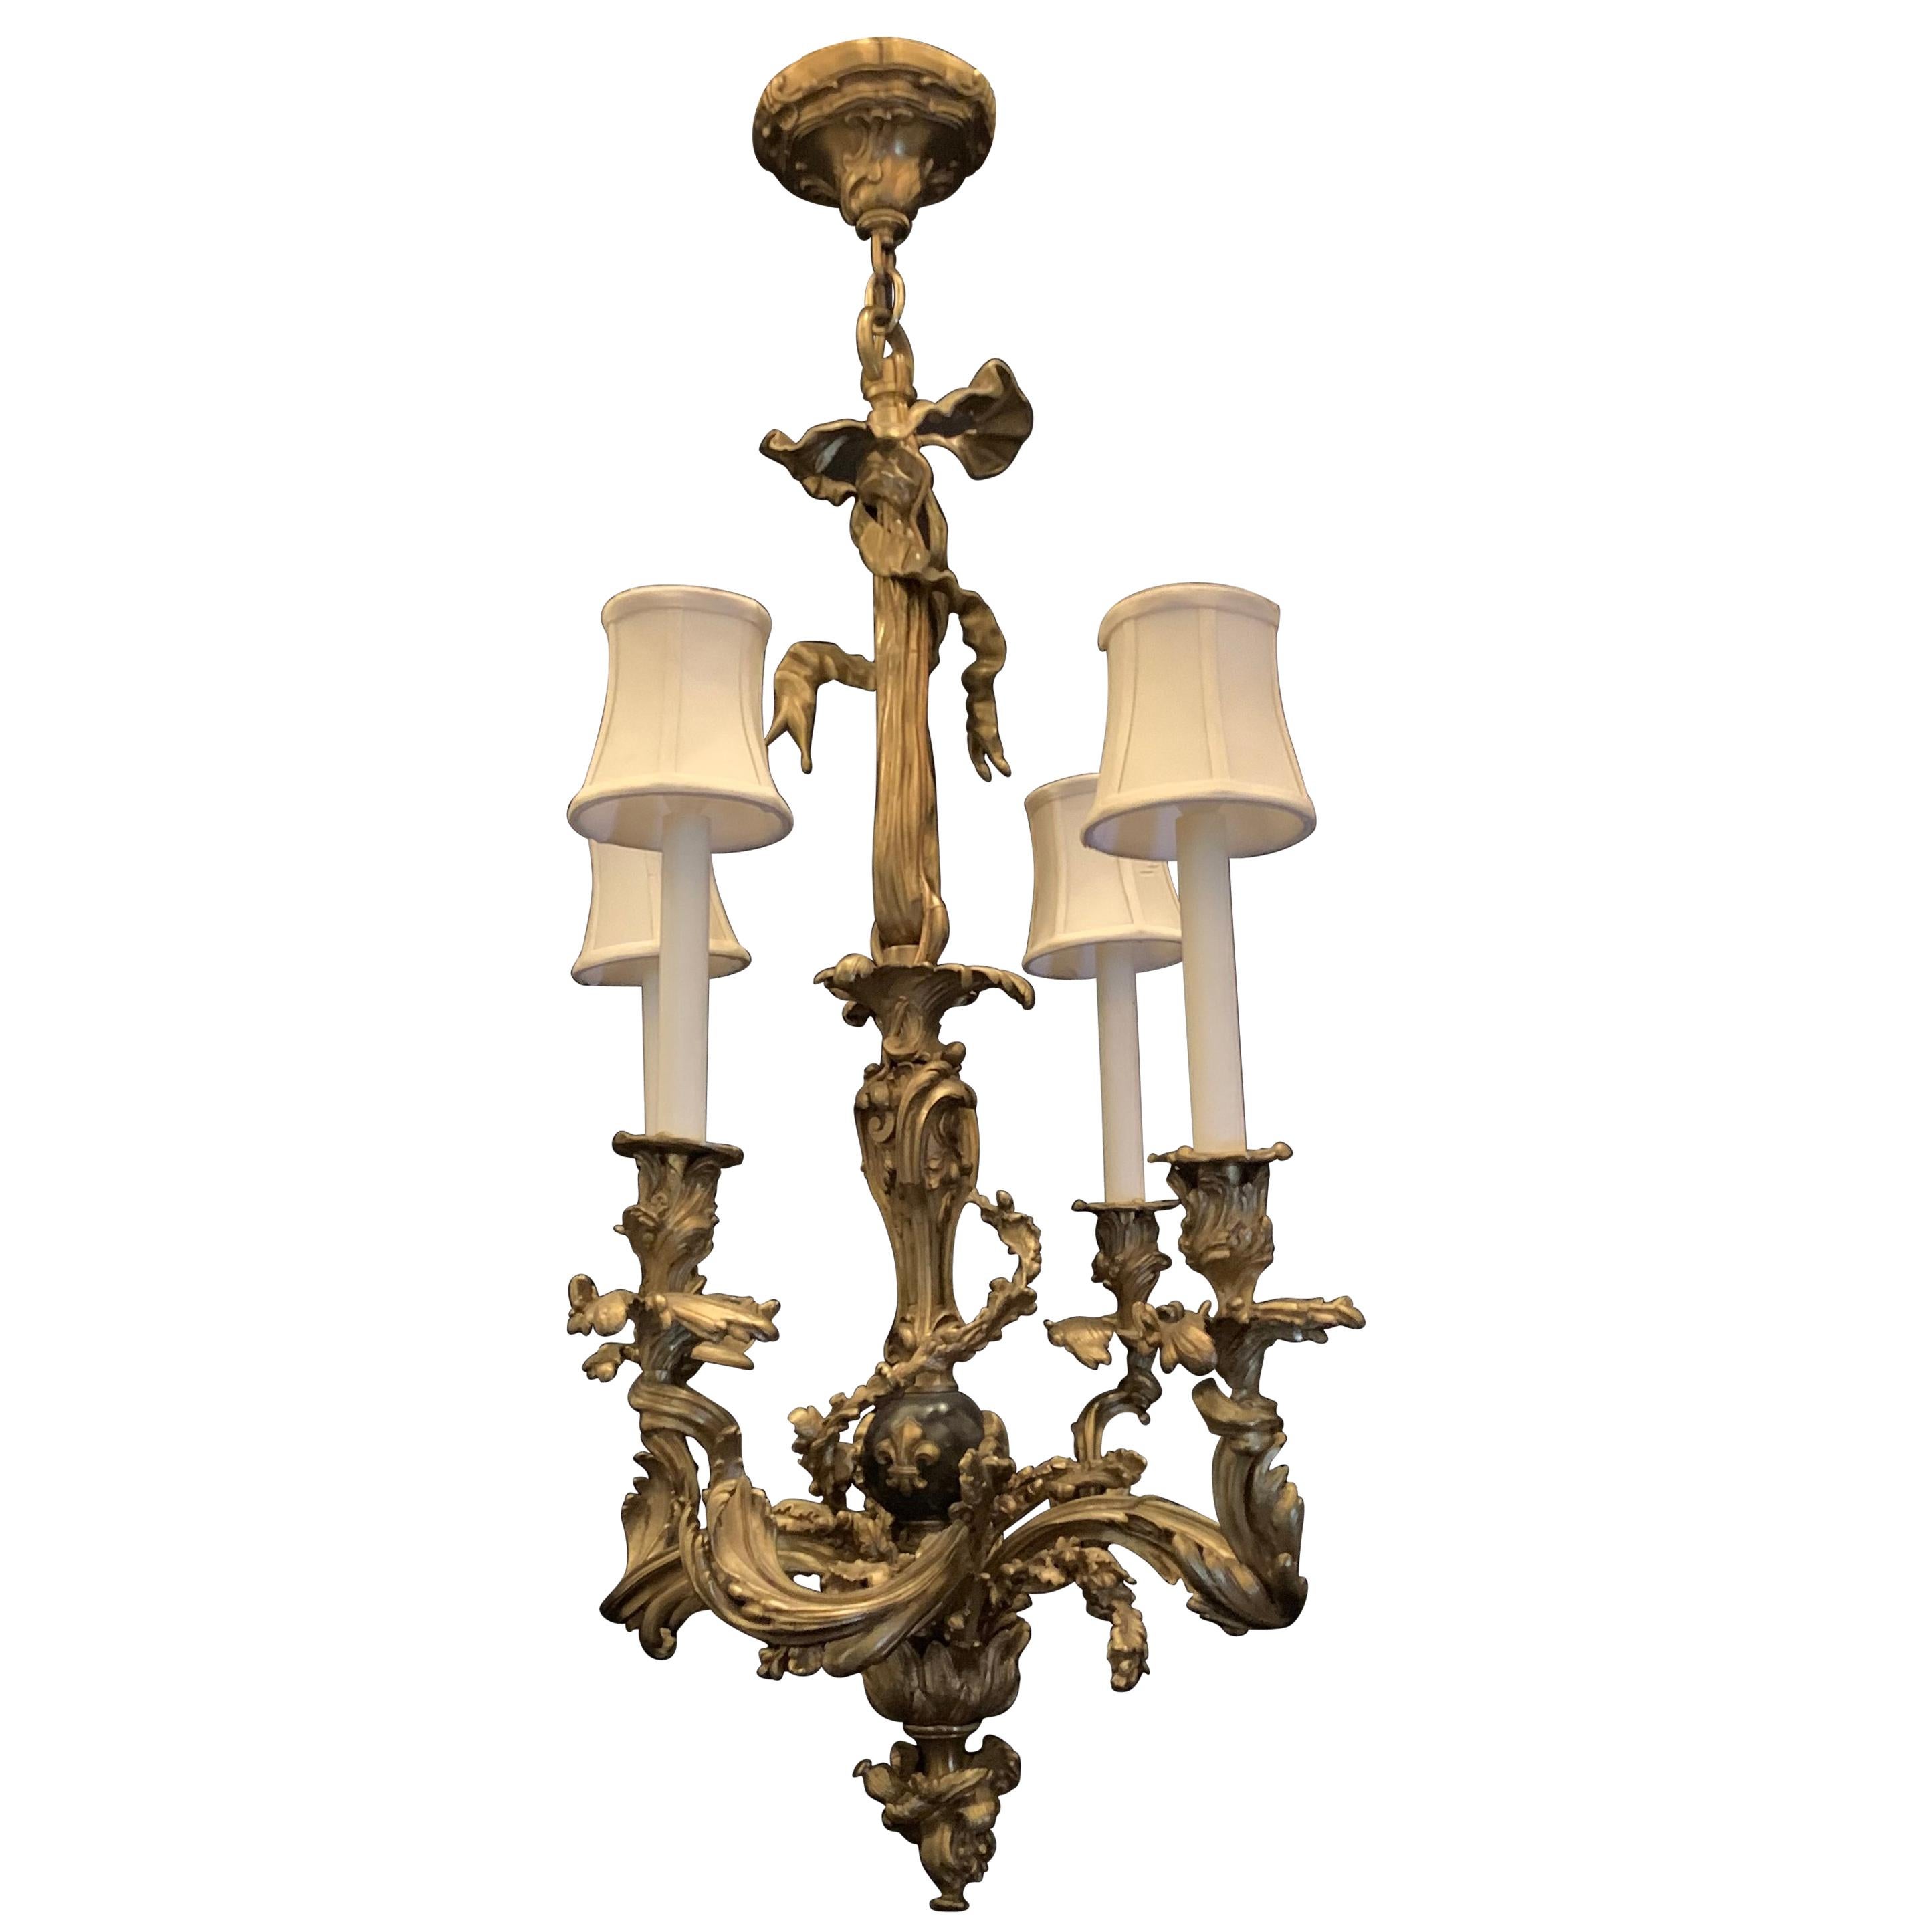 Wonderful French Neoclassical Bronze Patinated Bow Tassle Roccoco Chandelier